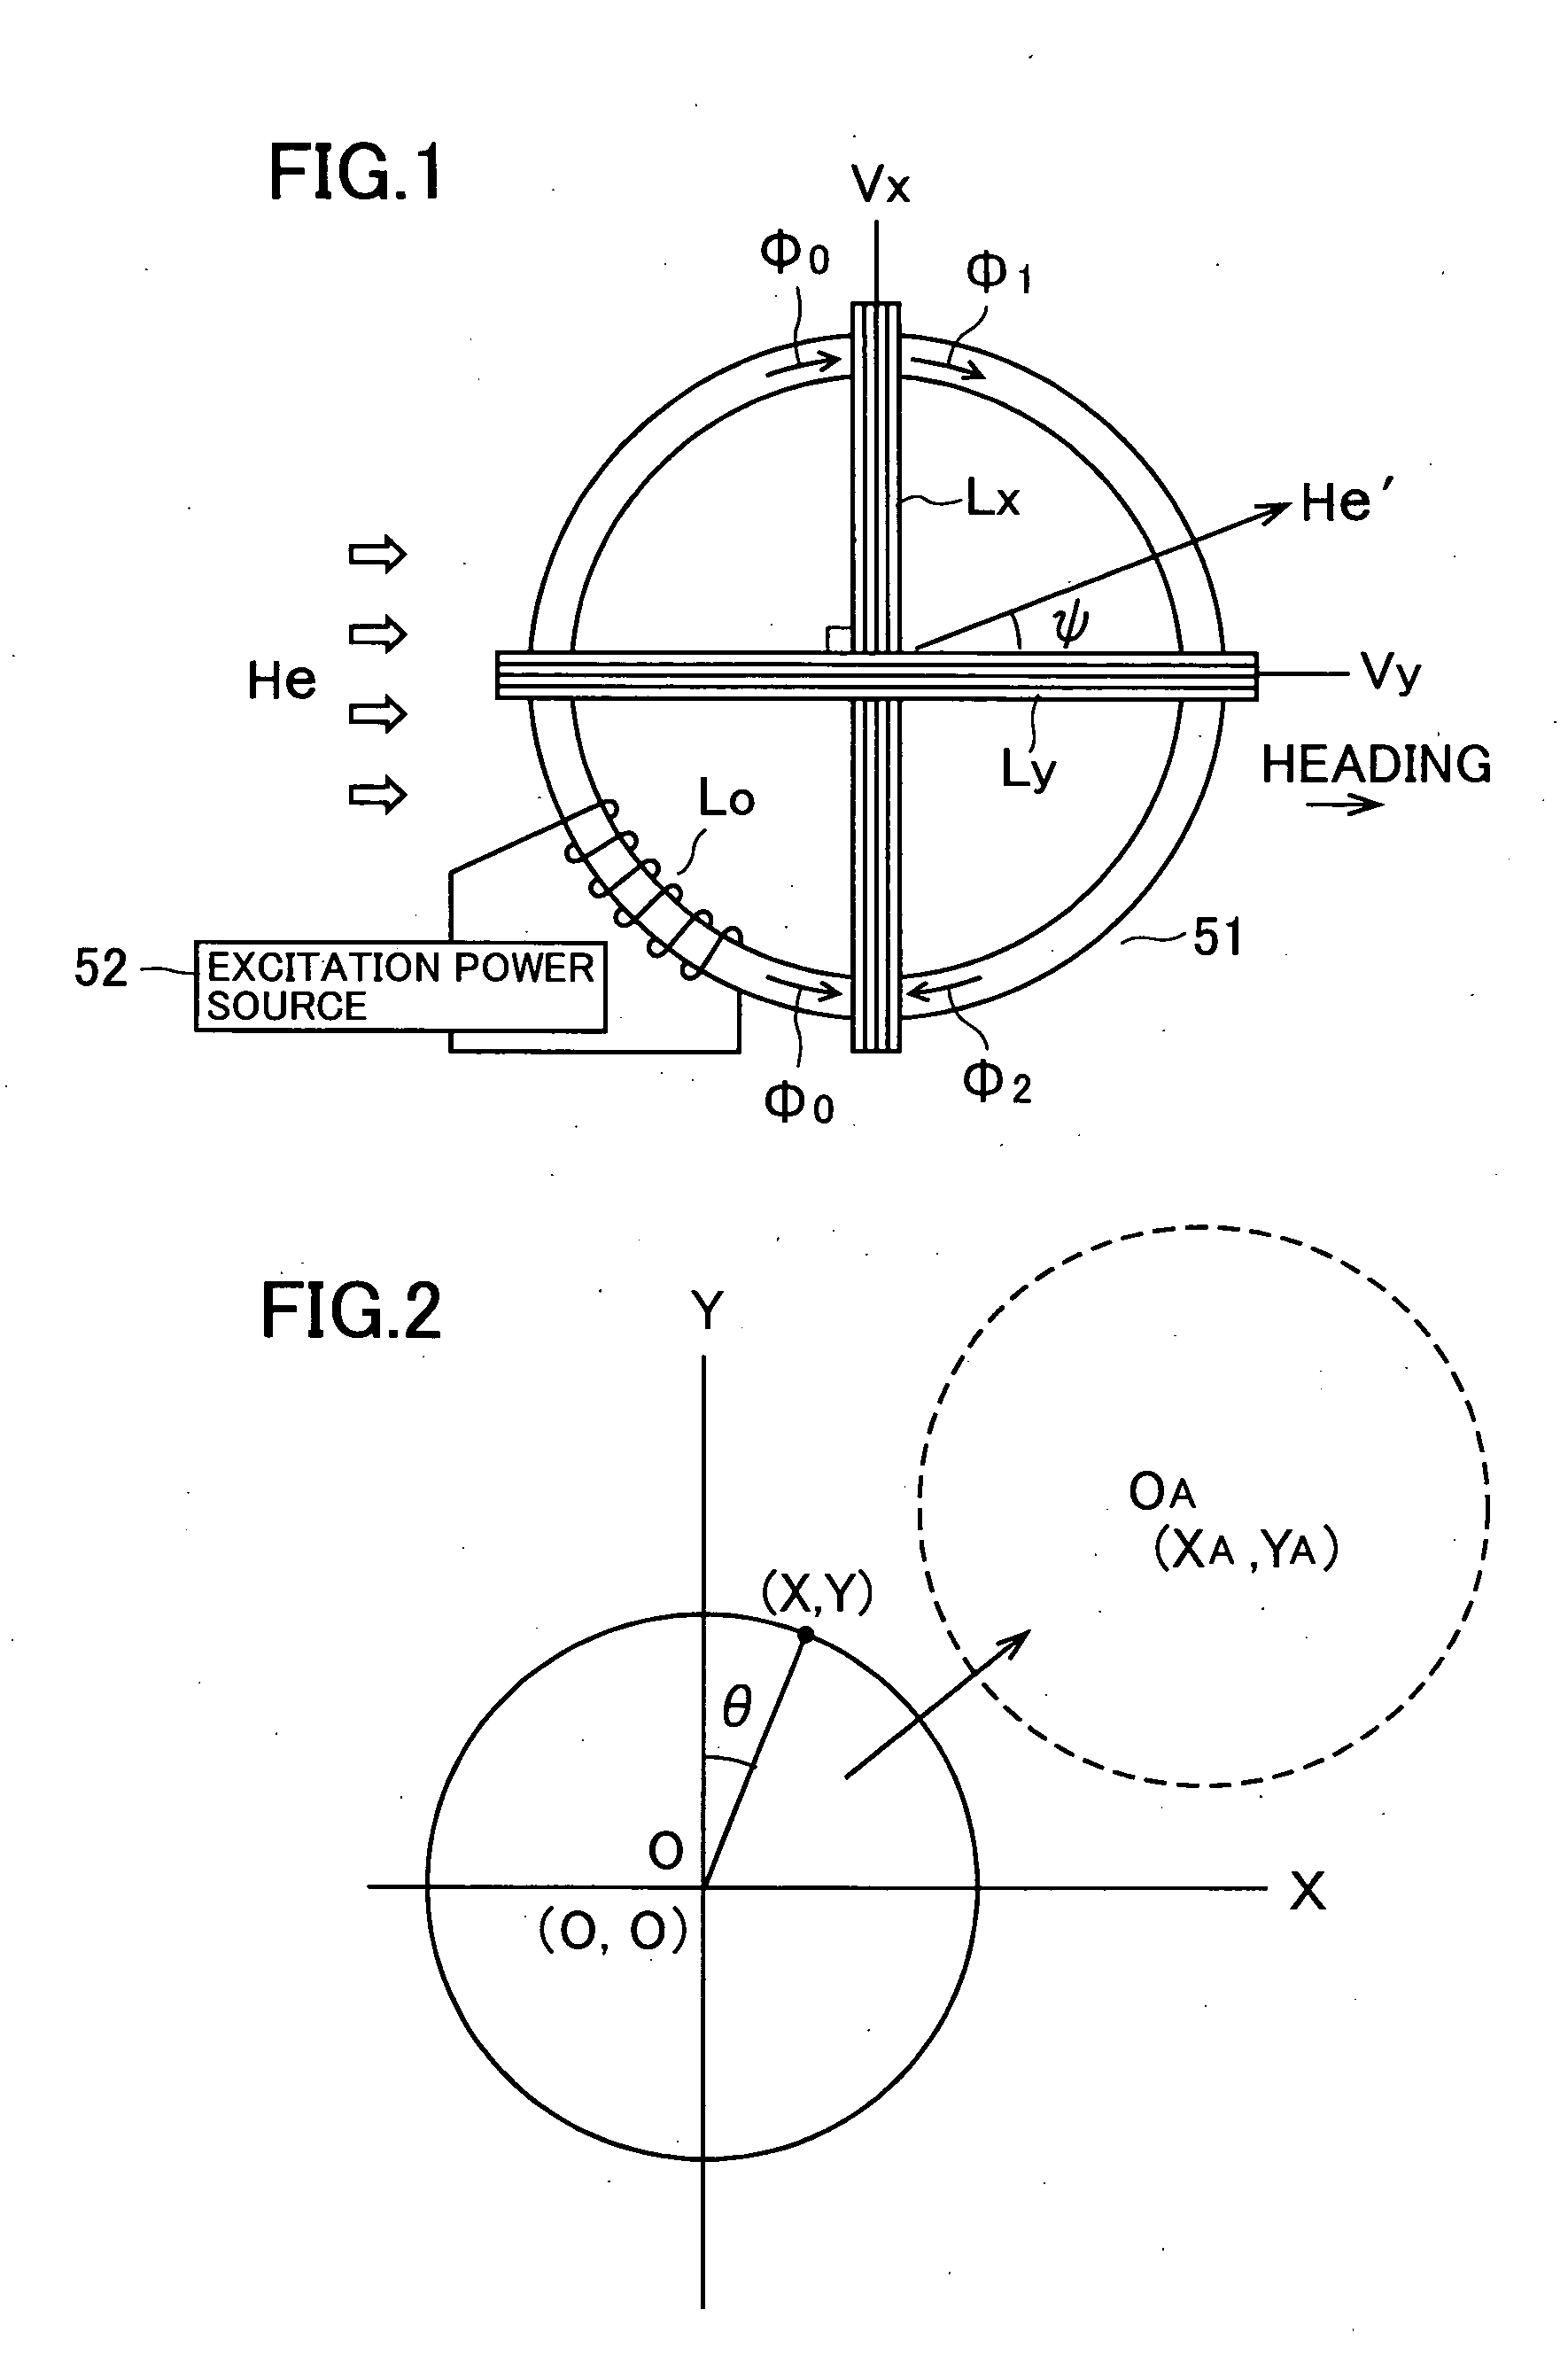 Electronic compass and direction finding method